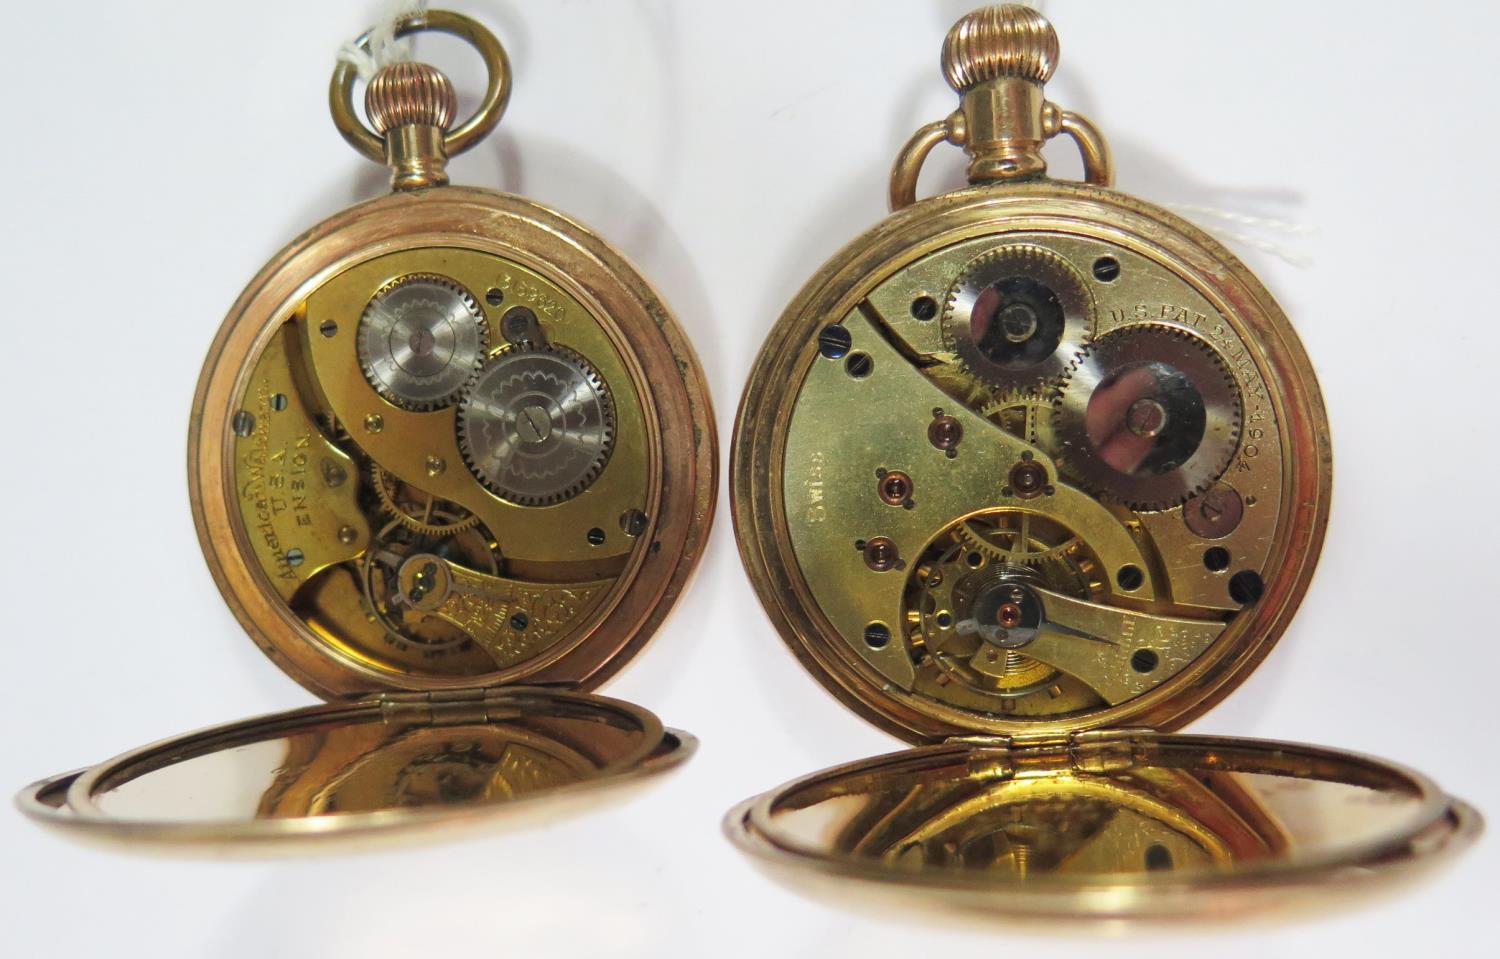 A Waltham Gold Plated Gent's Half Hunter Pocket Watch movement no. 13159620 (running, glass cracked) - Image 3 of 3